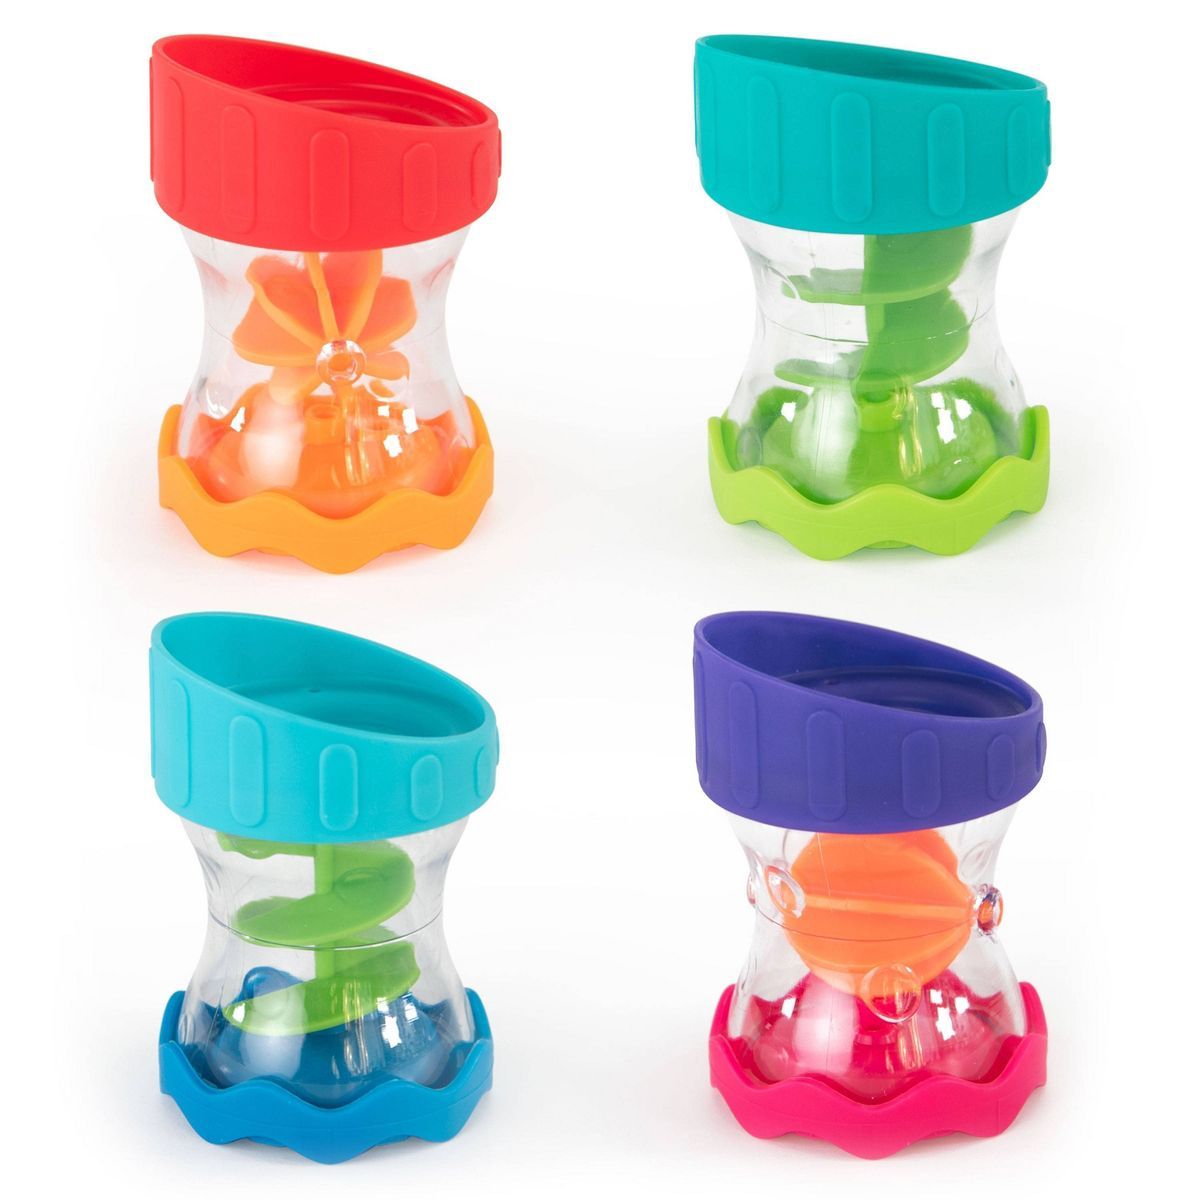 Sassy Toys Bright Water Works Spinners Bath Toy - 4ct | Target